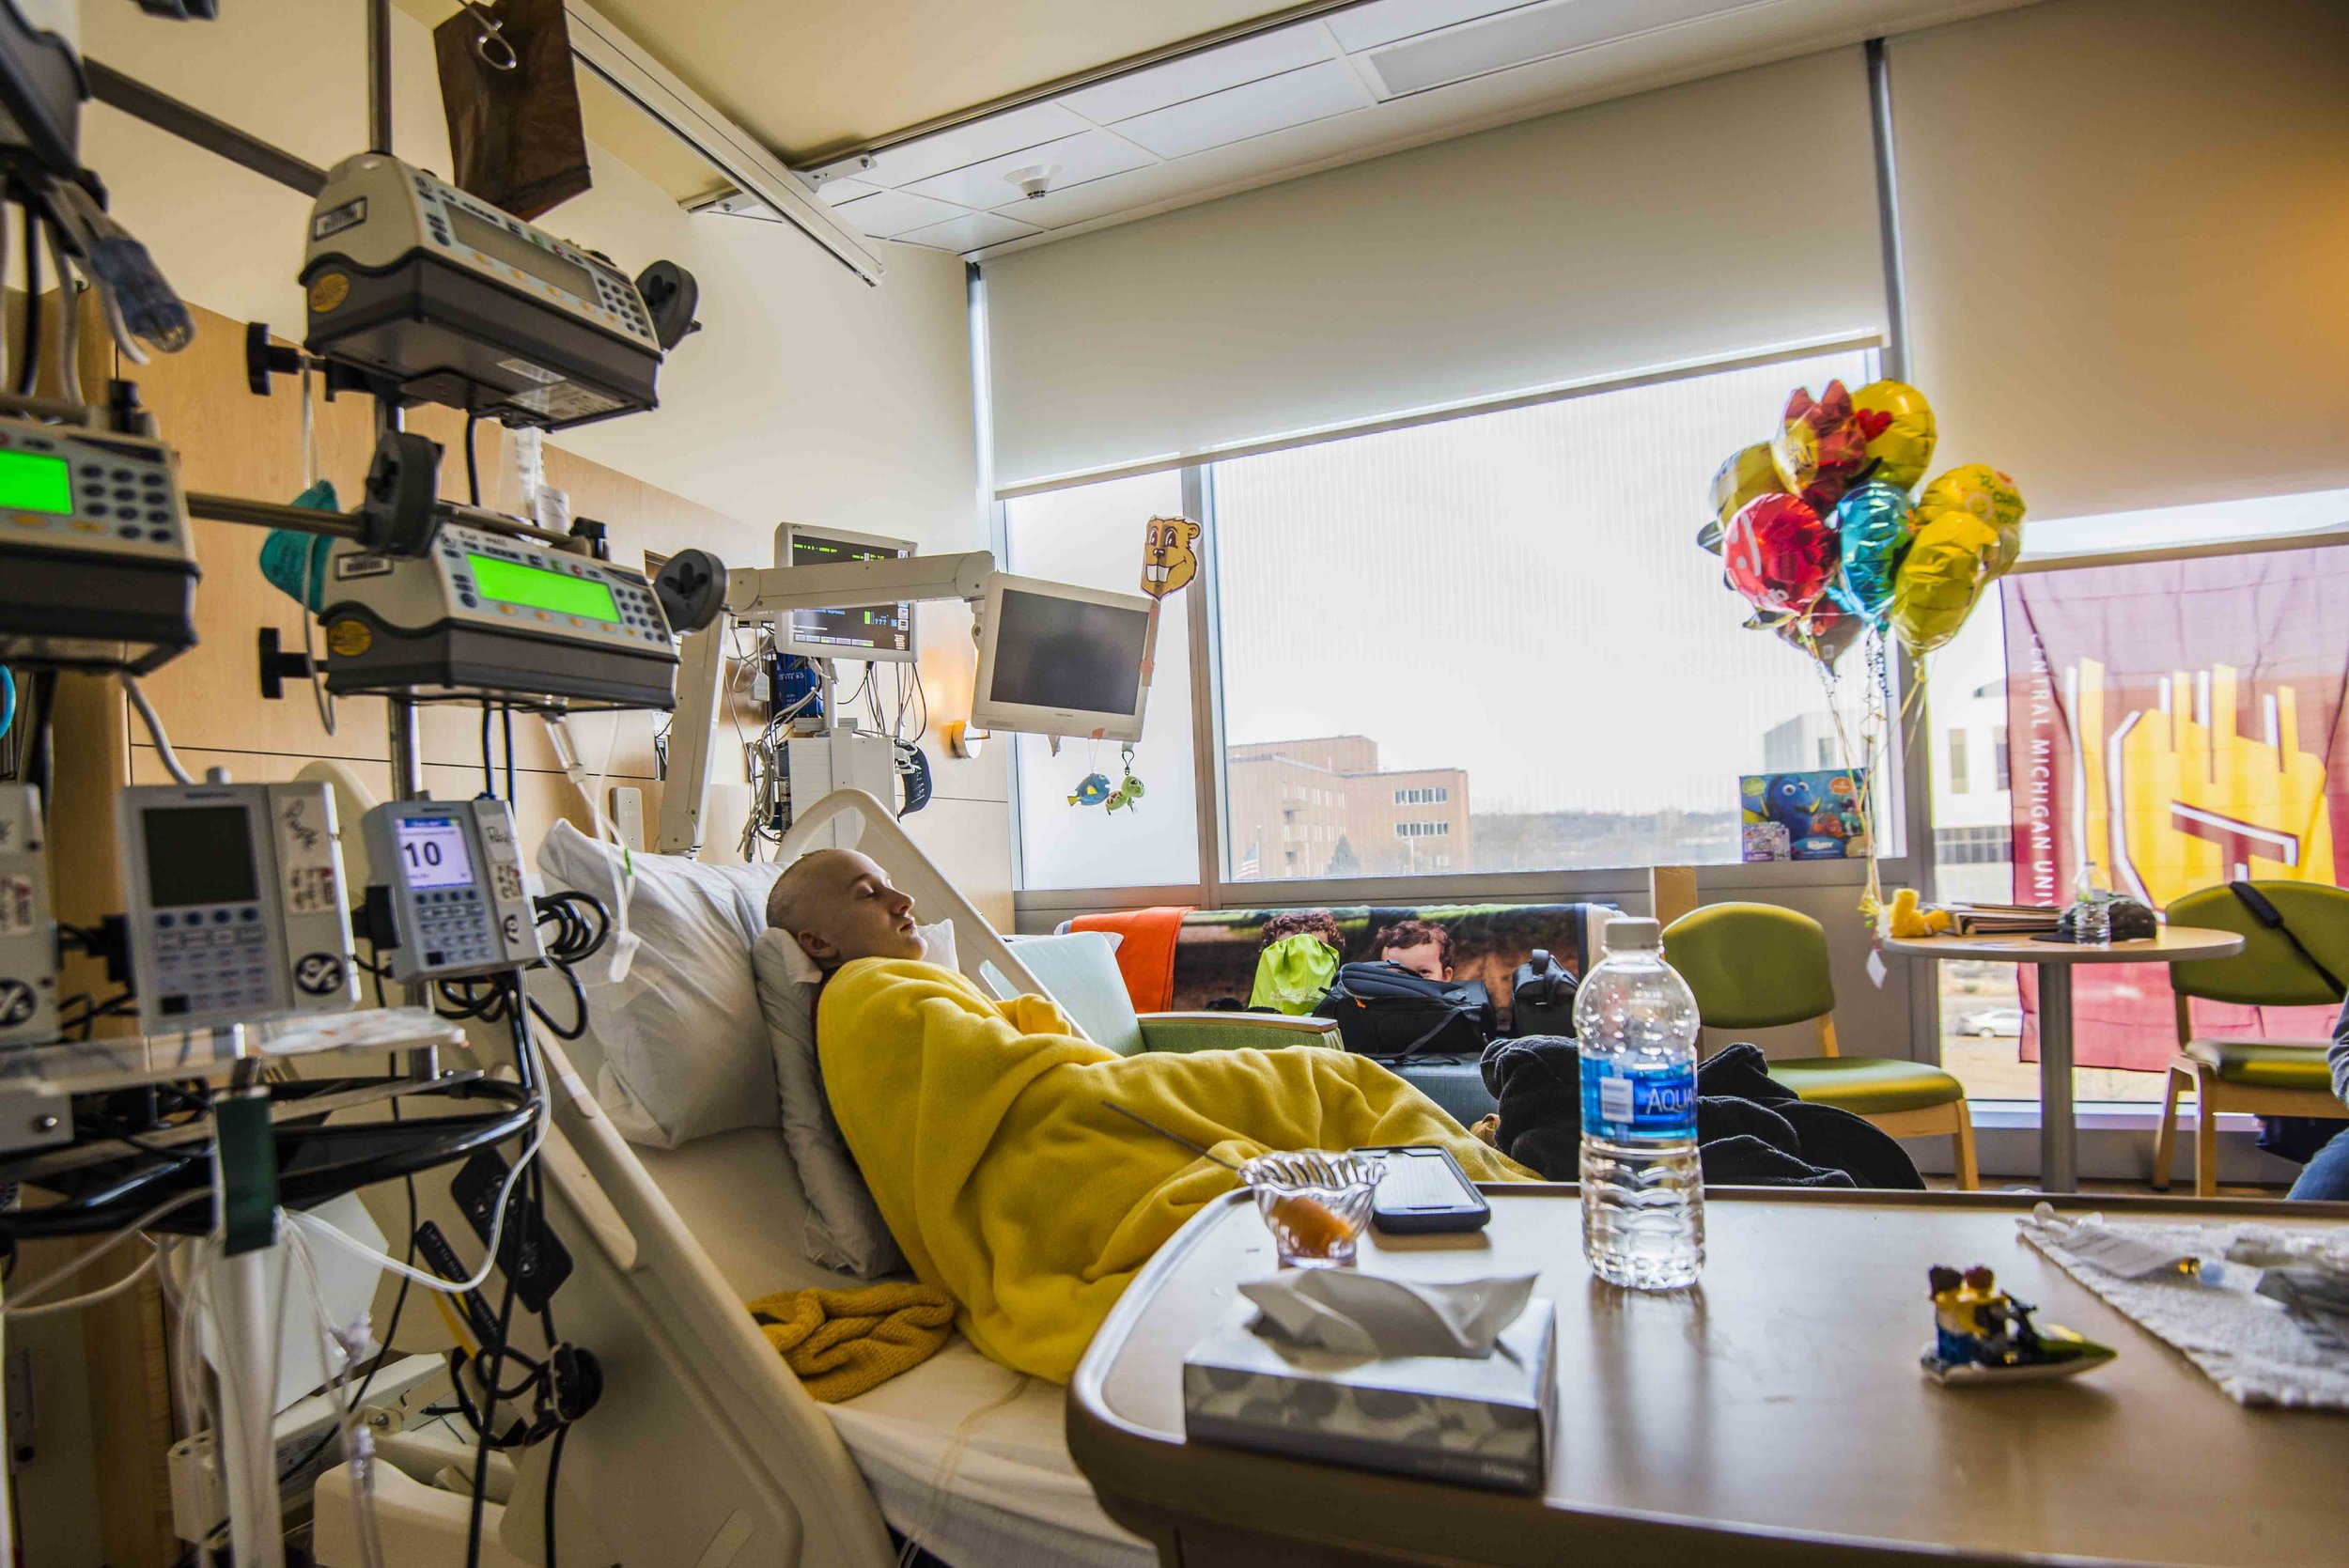  22-year-old Central Michigan University senior Kyle Tanner lays in his room, March 4, 2017 on the 4th floor of the University of Minnesota's Masonic Children Hospital. Tanner is recovering from a bone marrow transplant along with chemo and radiation